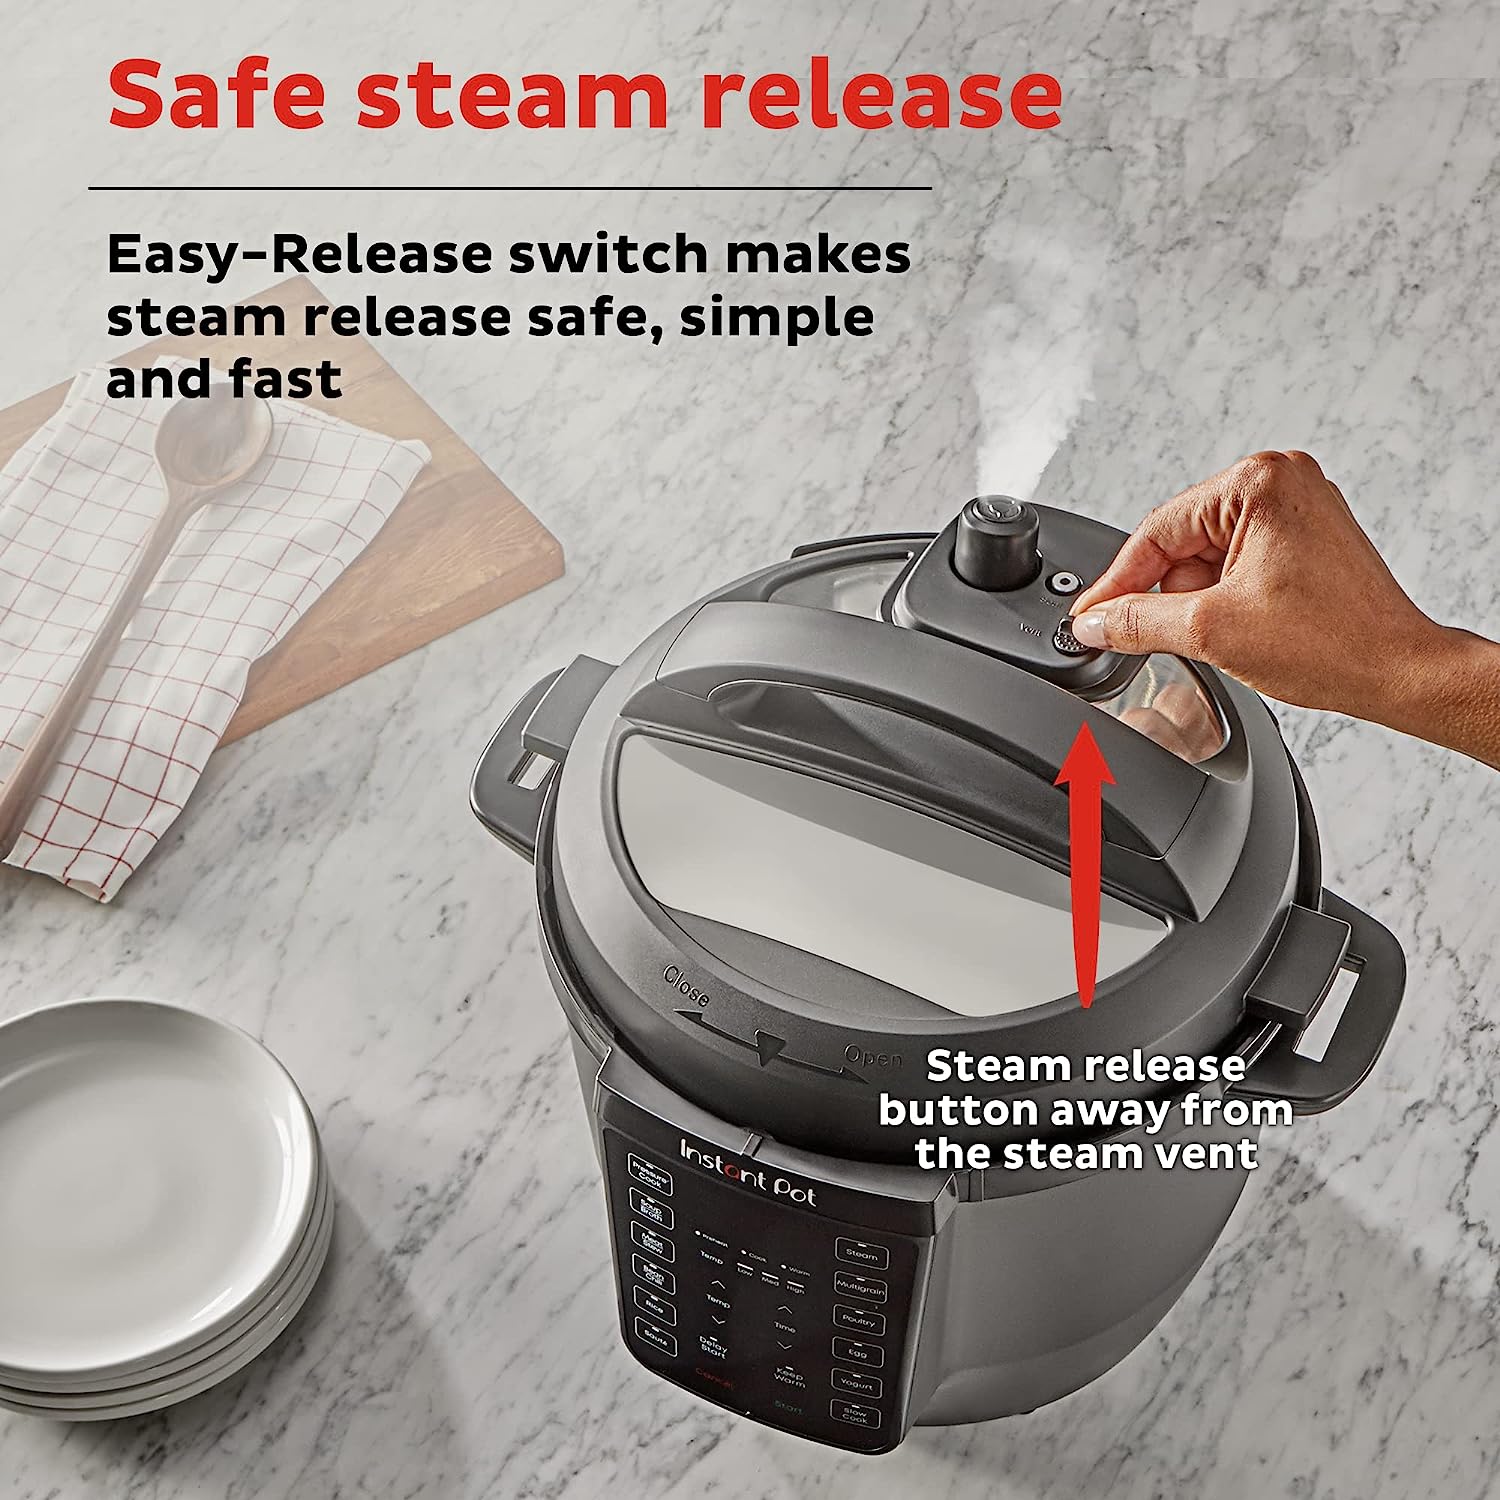 https://bigbigmart.com/wp-content/uploads/2023/07/Instant-Pot-RIO-Formerly-Known-as-Duo-7-in-1-Electric-Multi-Cooker-Pressure-Cooker-Slow-Cooker-Rice-Cooker-Steamer-Saute-Yogurt-Maker-Warmer-Includes-App-With-Over-800-Recipes-6-Quart2.jpg